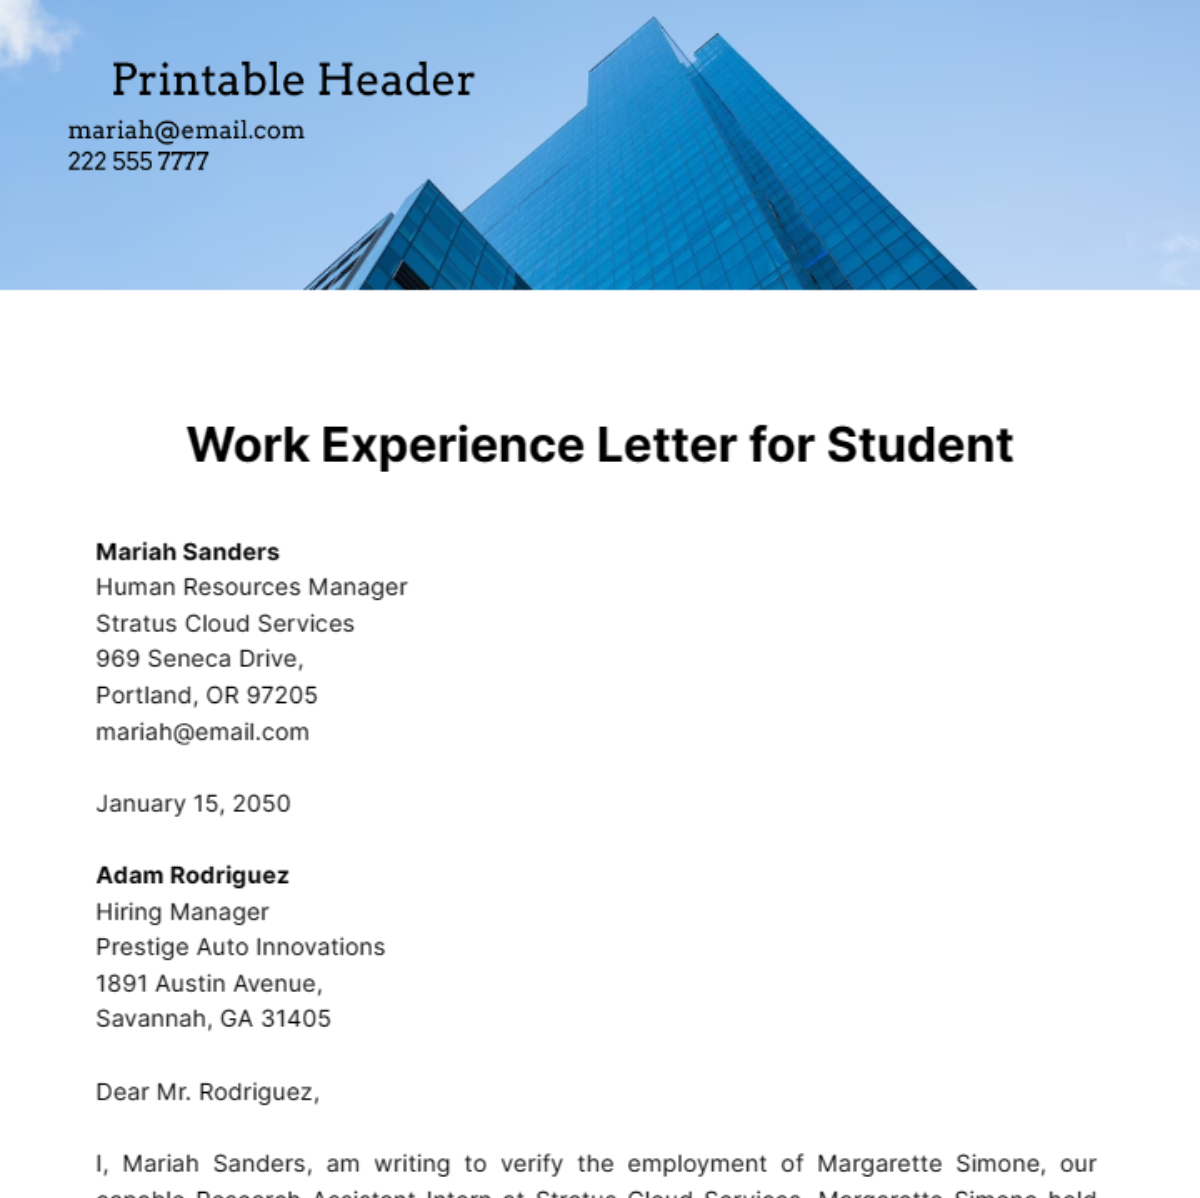 Work Experience Letter for Student Template